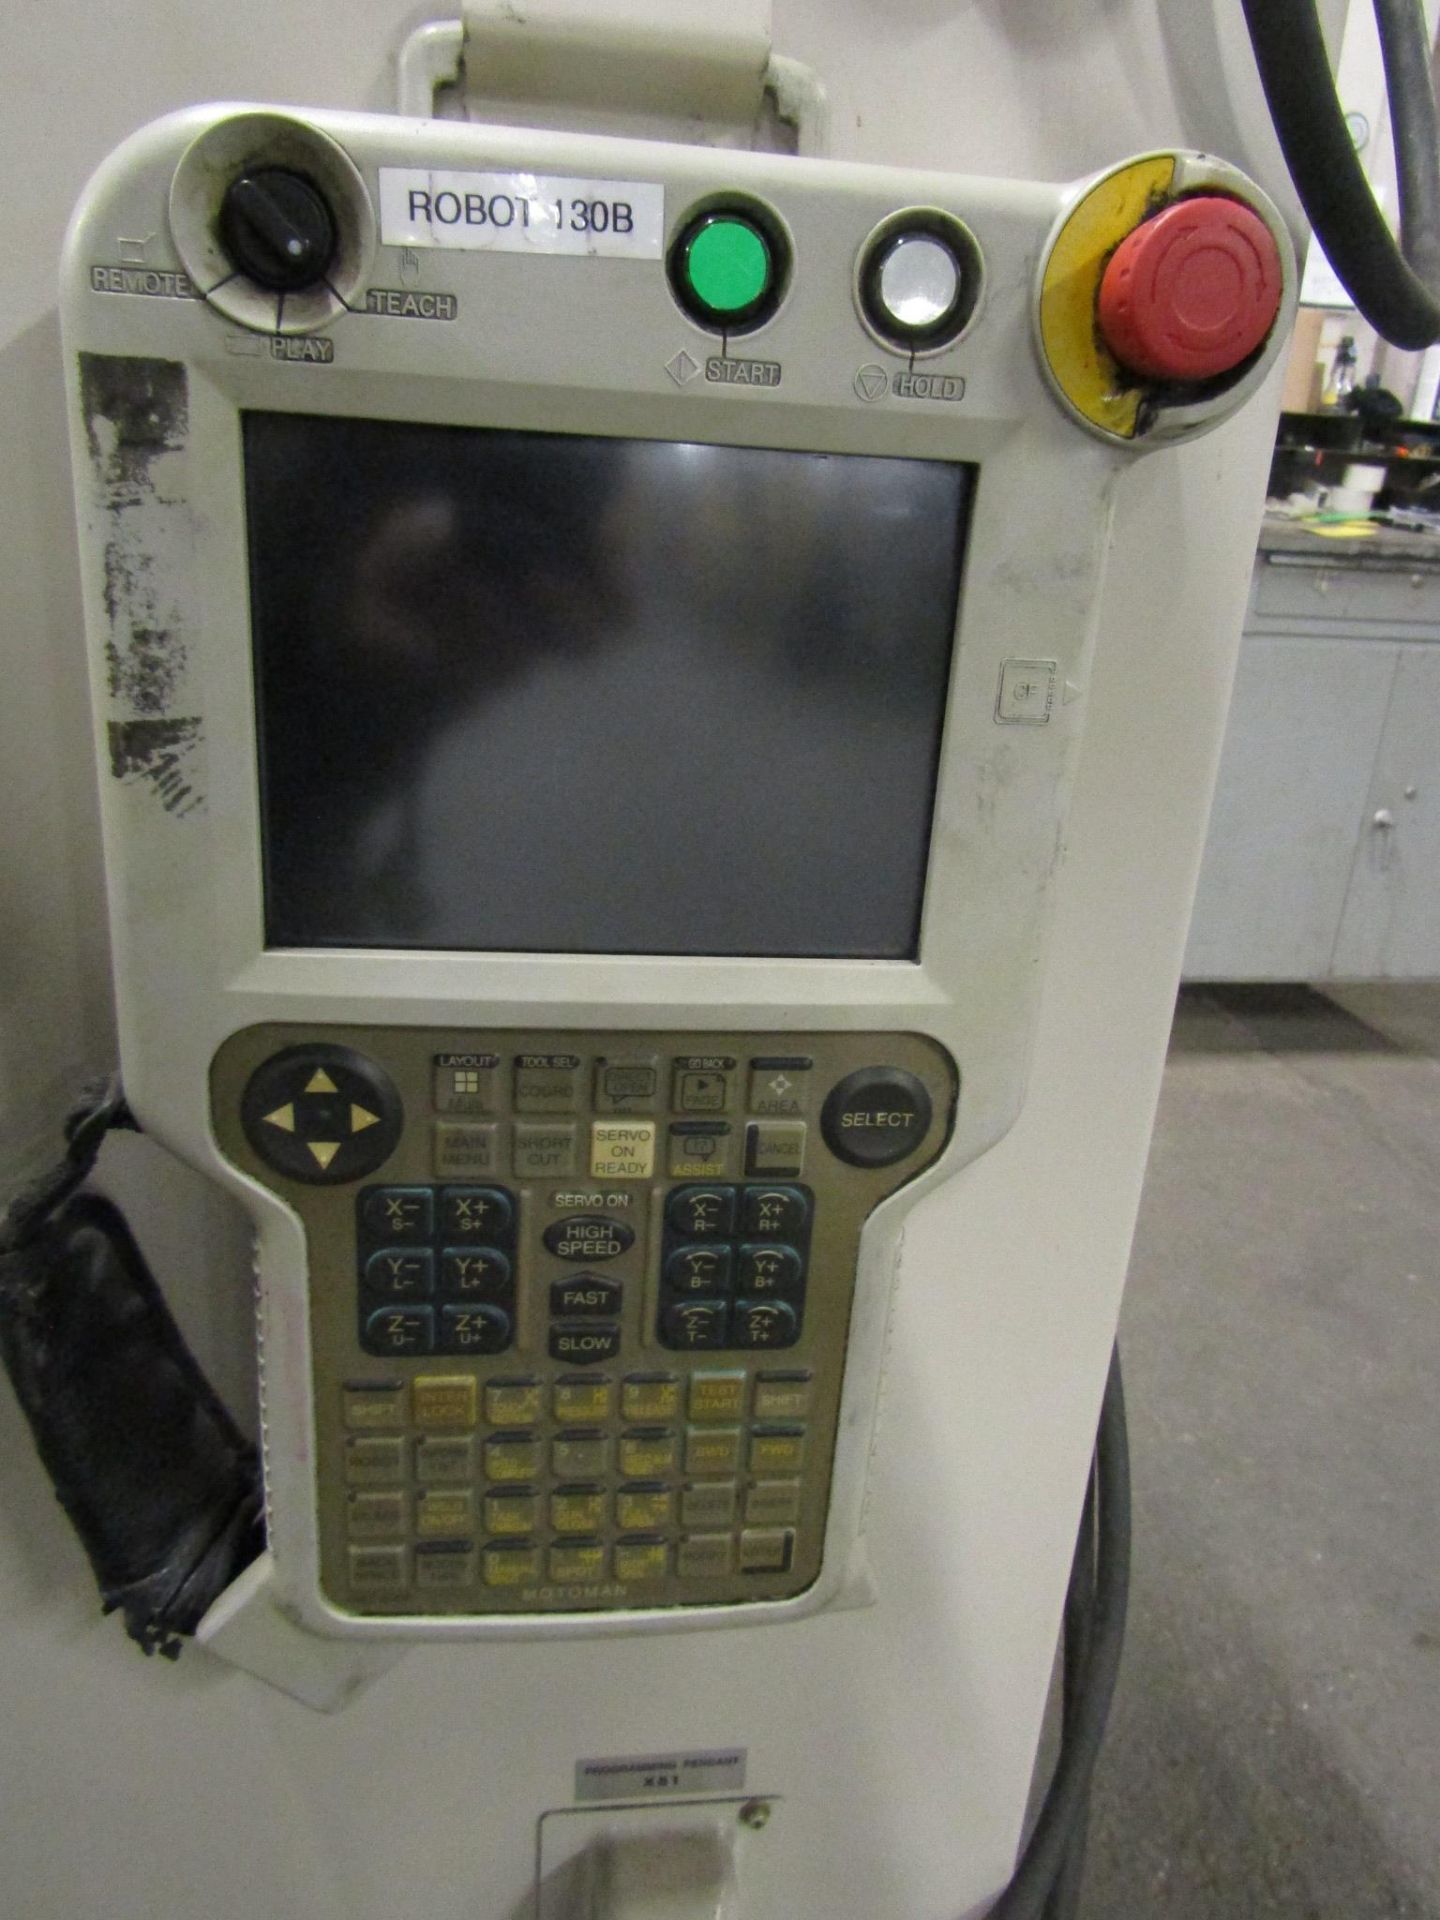 2008 Motoman ES165N Robot 165kg Capacity with Controller COMPLETE with Teach Pendant, Cables, LOW - Image 2 of 3